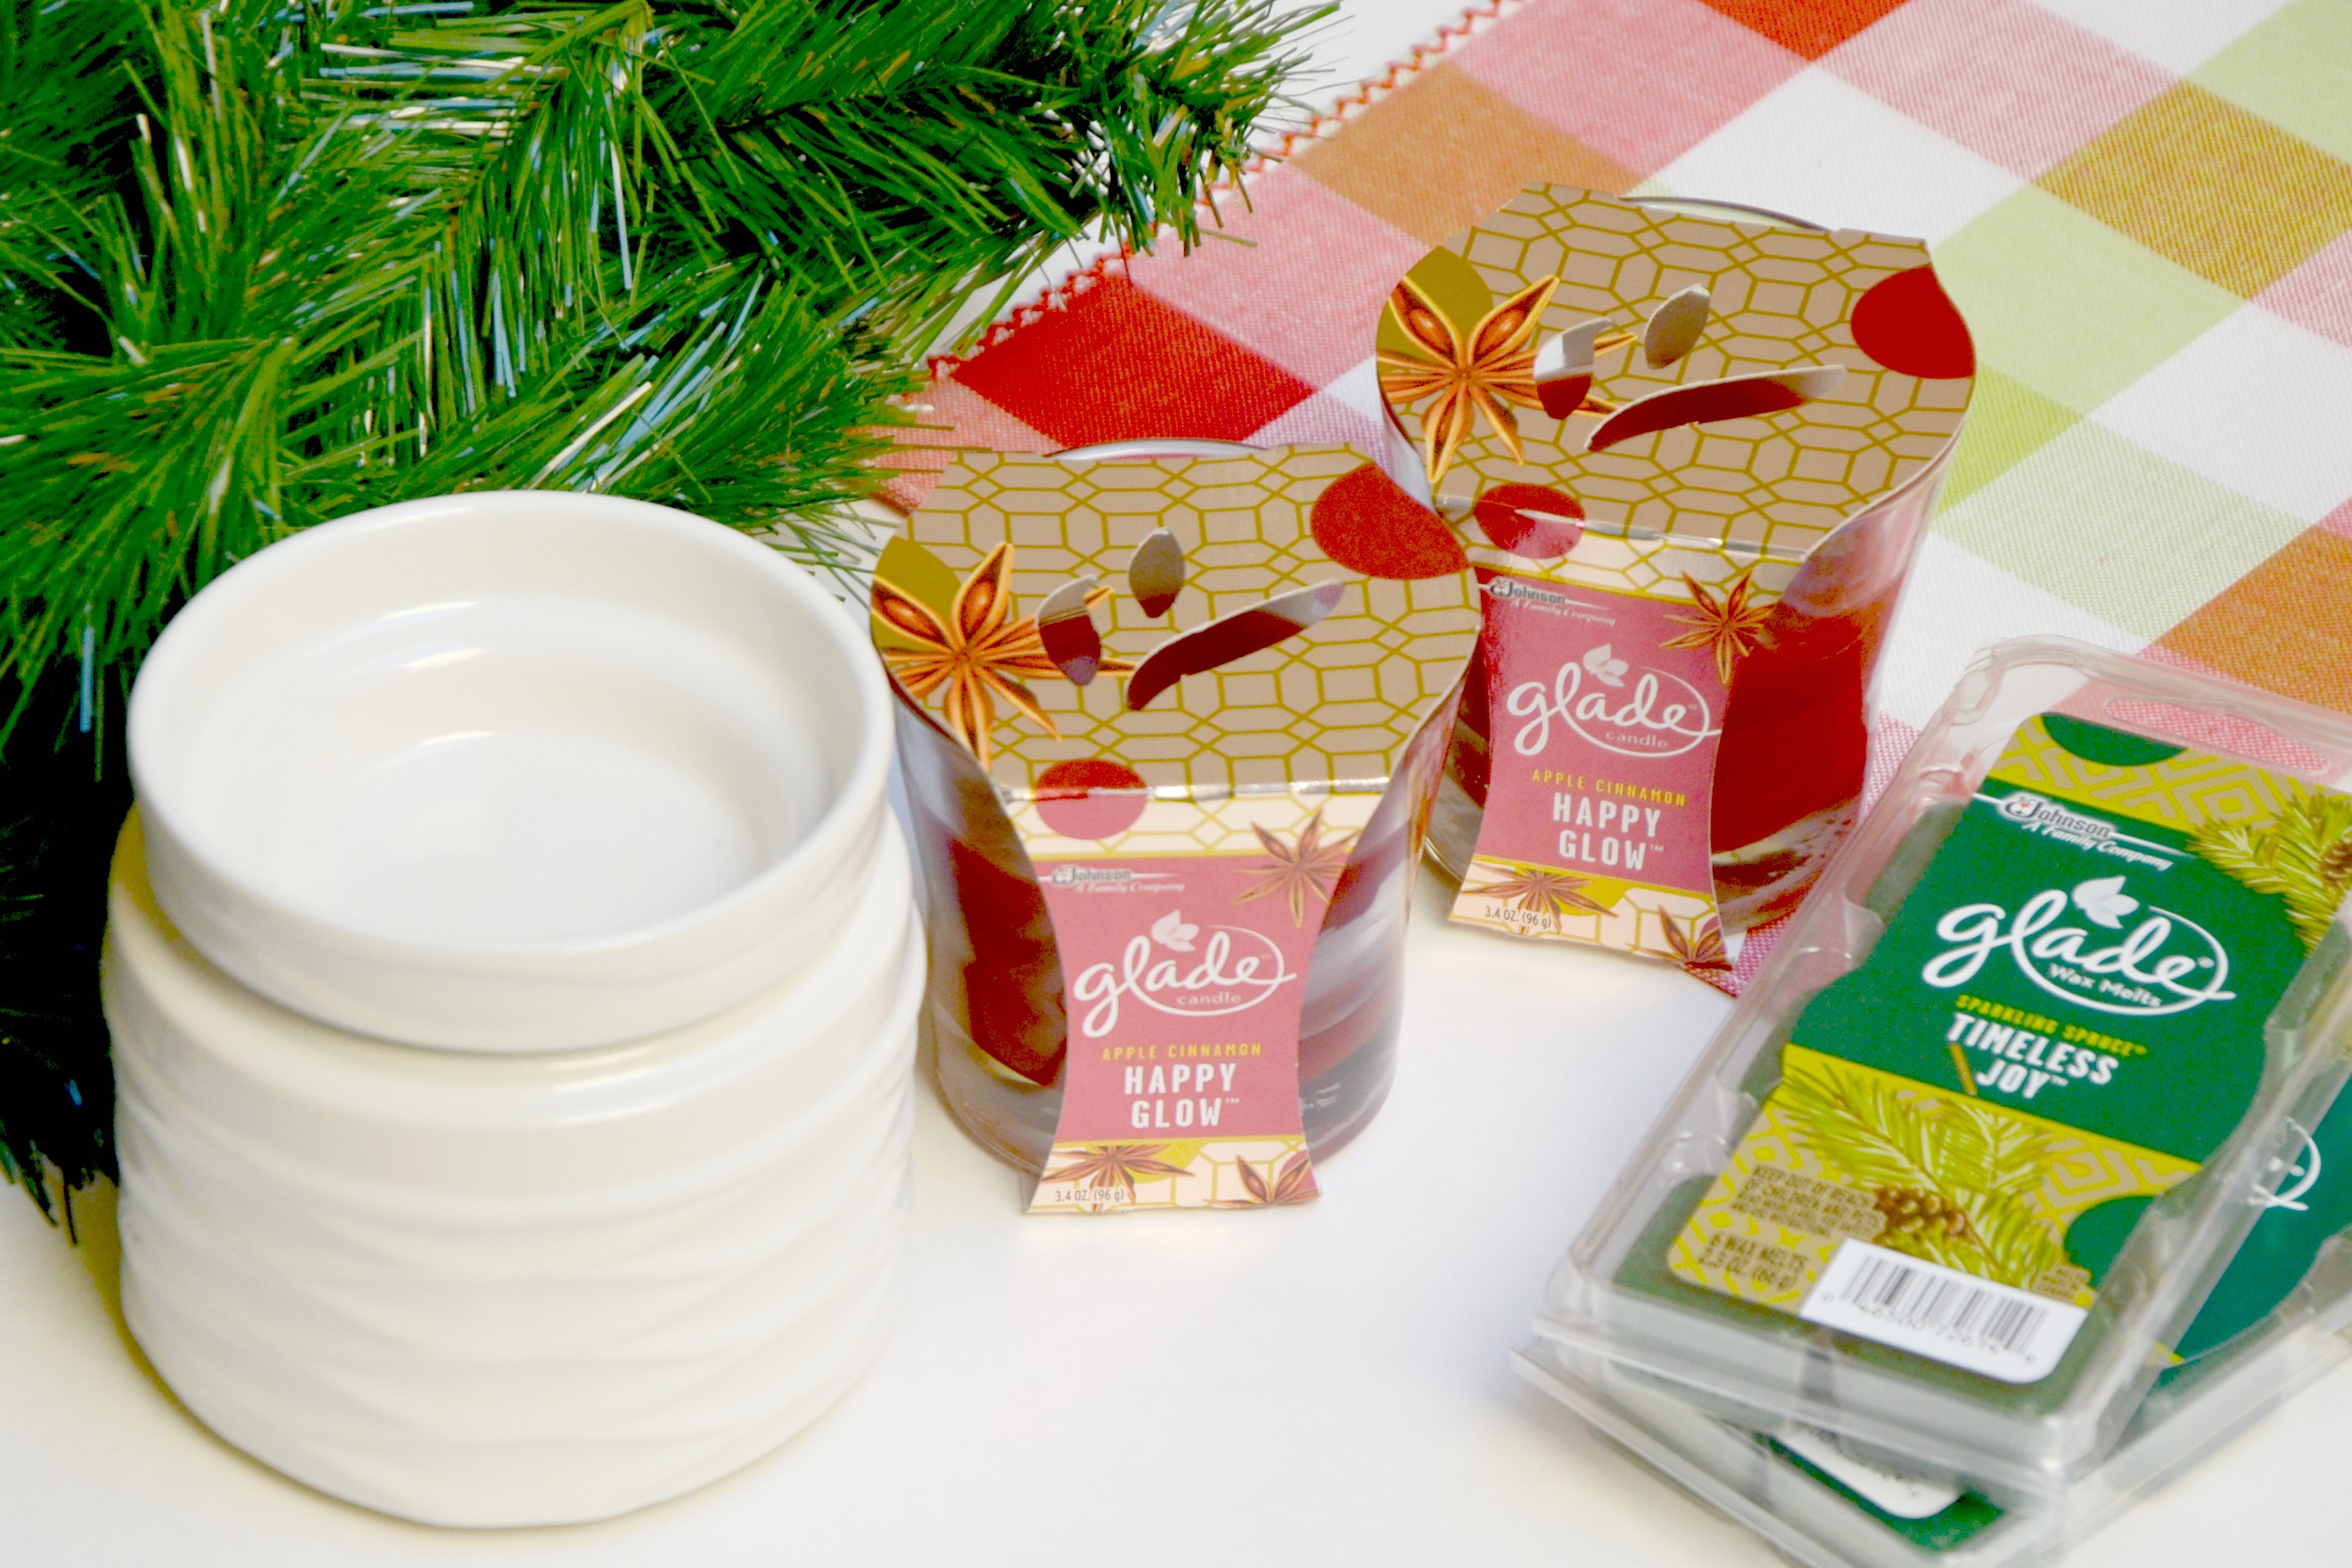 Glade holiday gifts